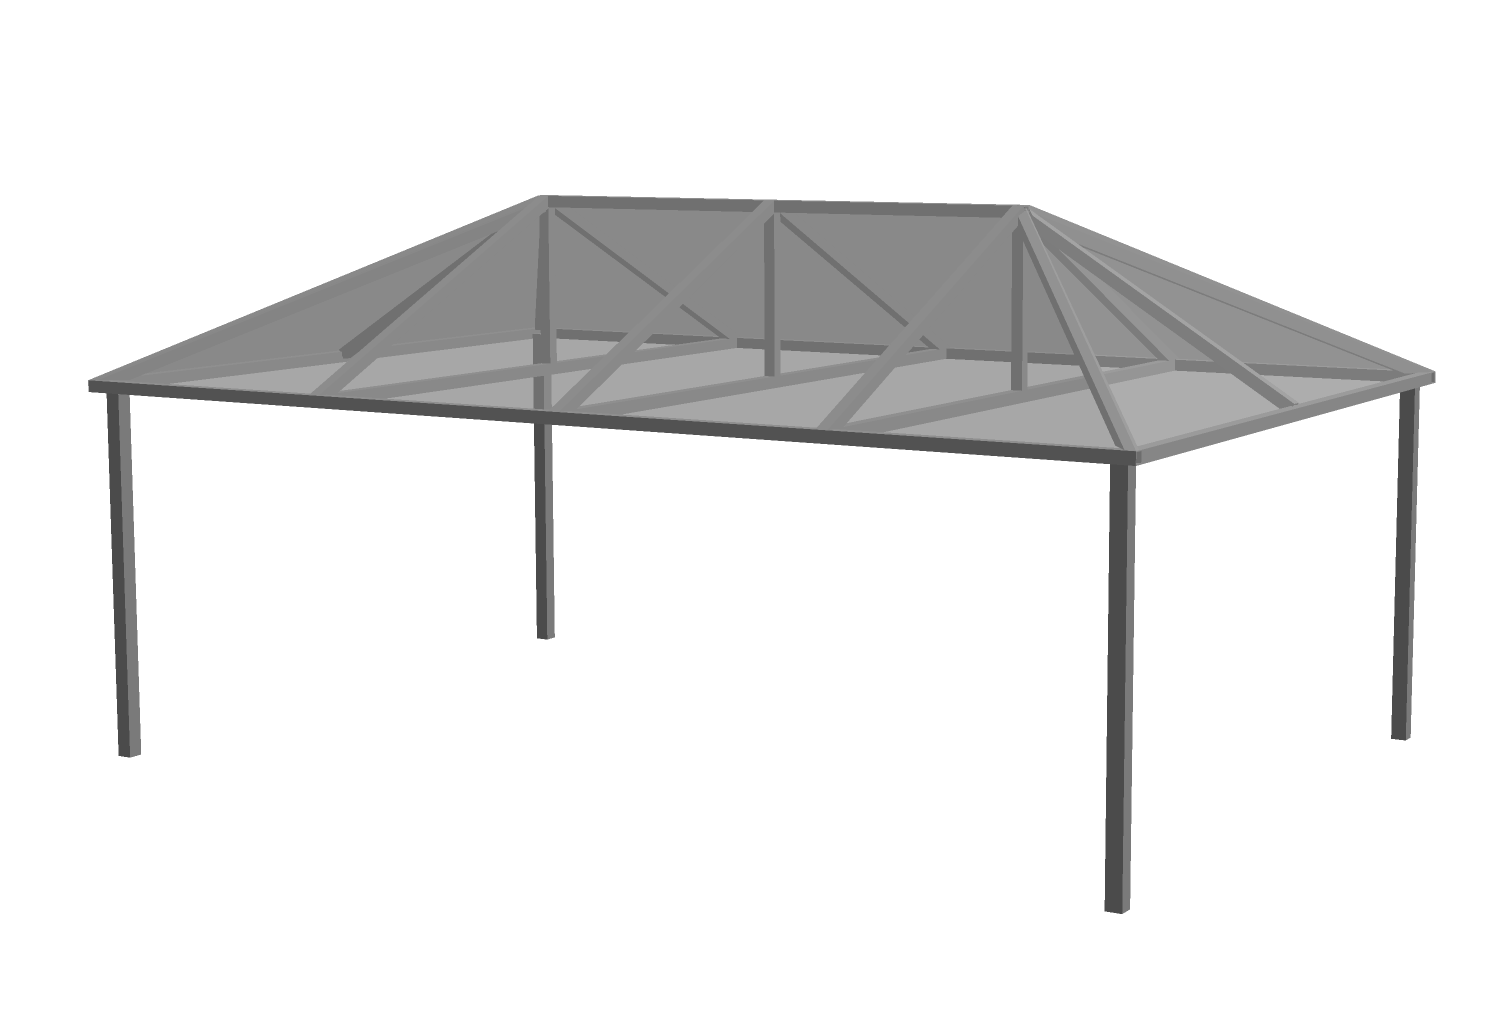 3D model of a hipped canopy awning